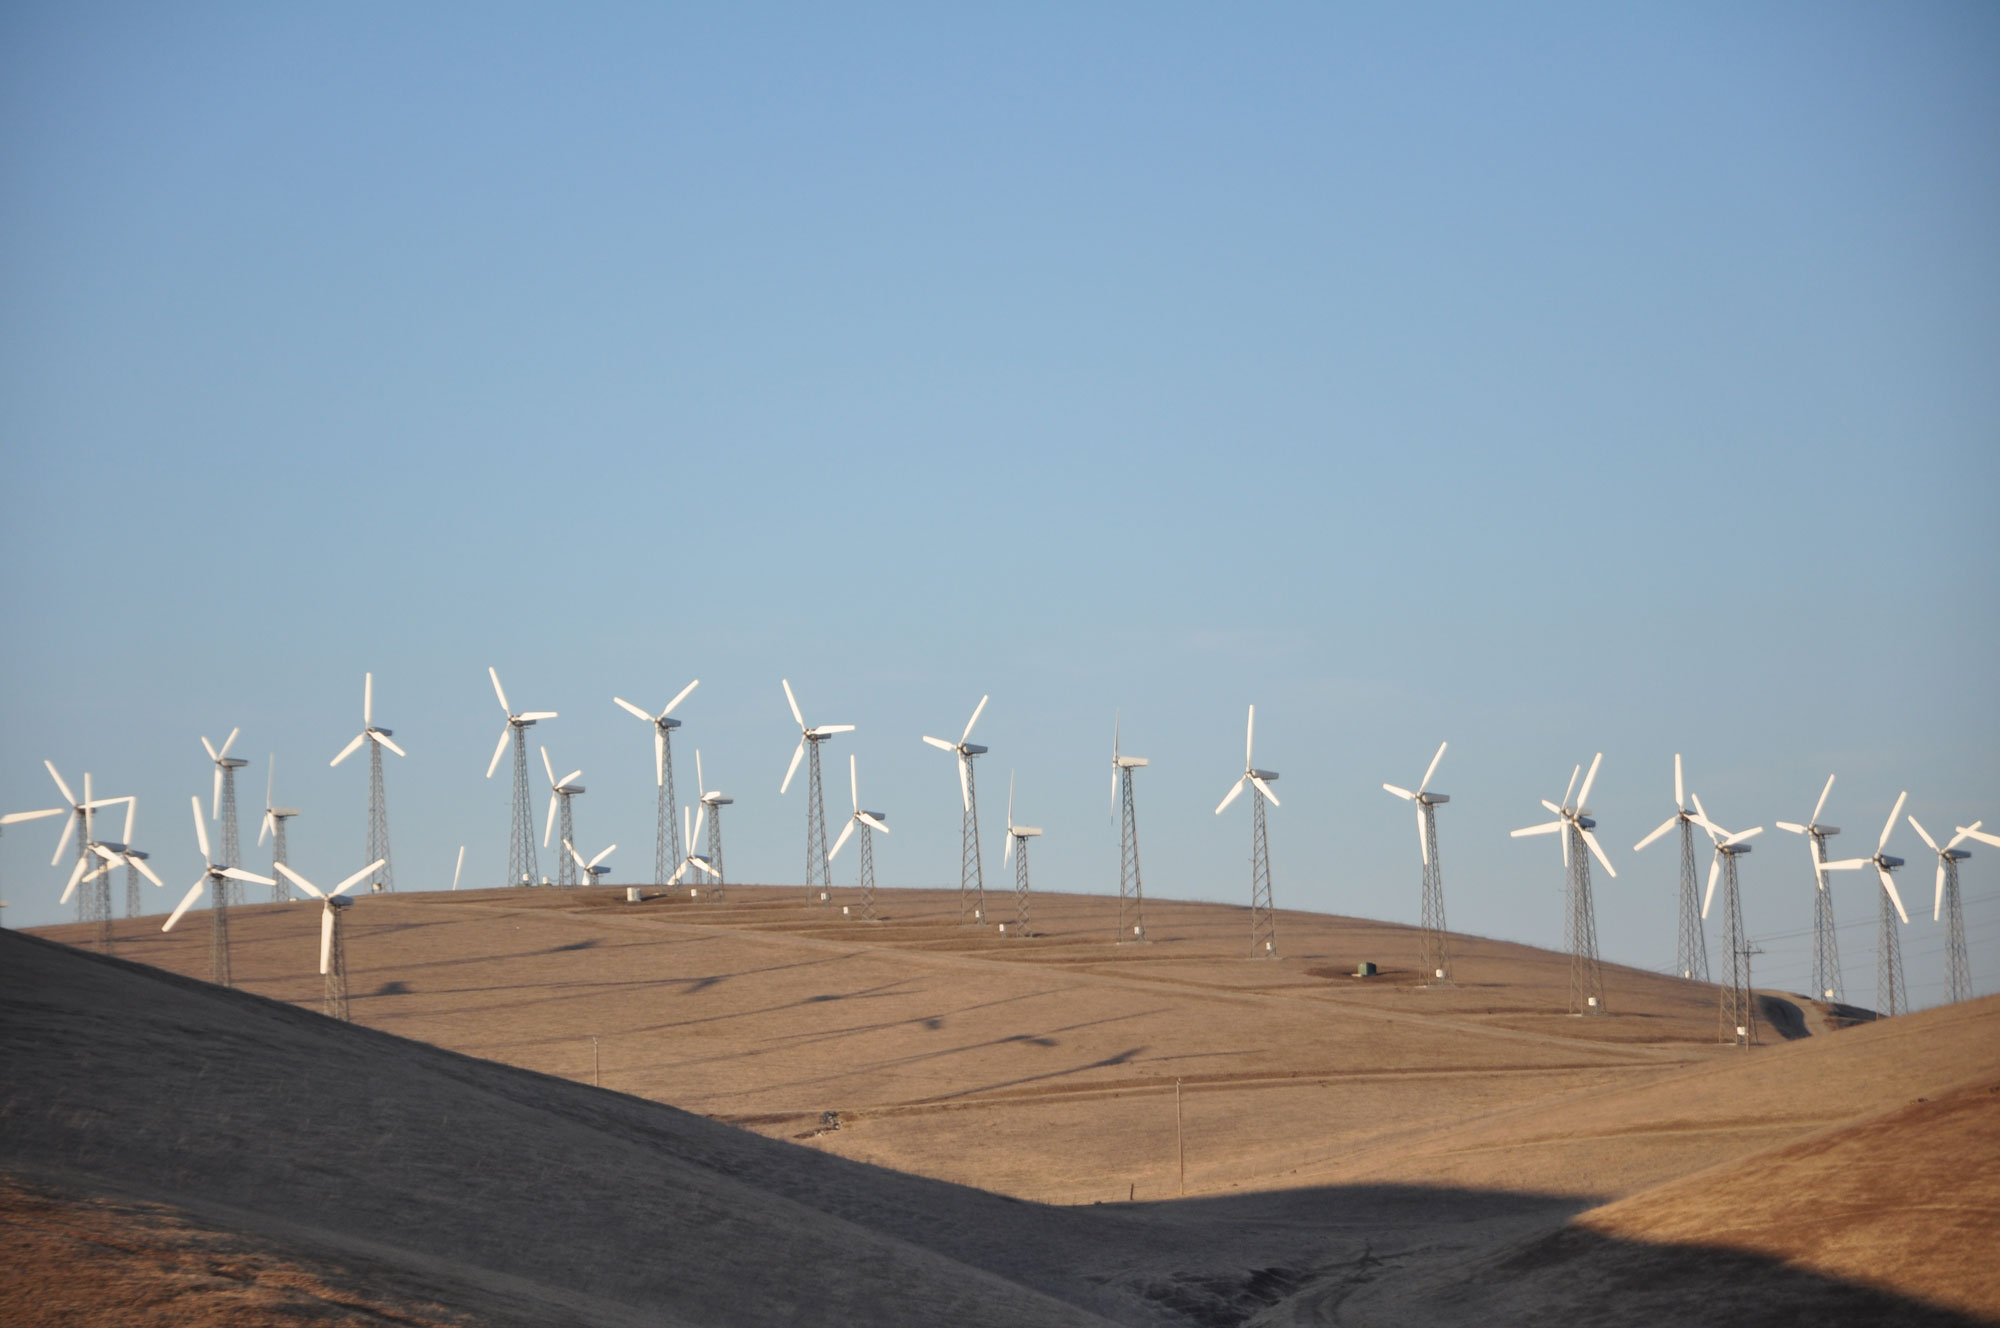 Photograph of the Altamont Wind Farm in California. The photo shows numerous white wind turbines dotting a landscape of rolling hills covered by yellow vegetation, probably grass.